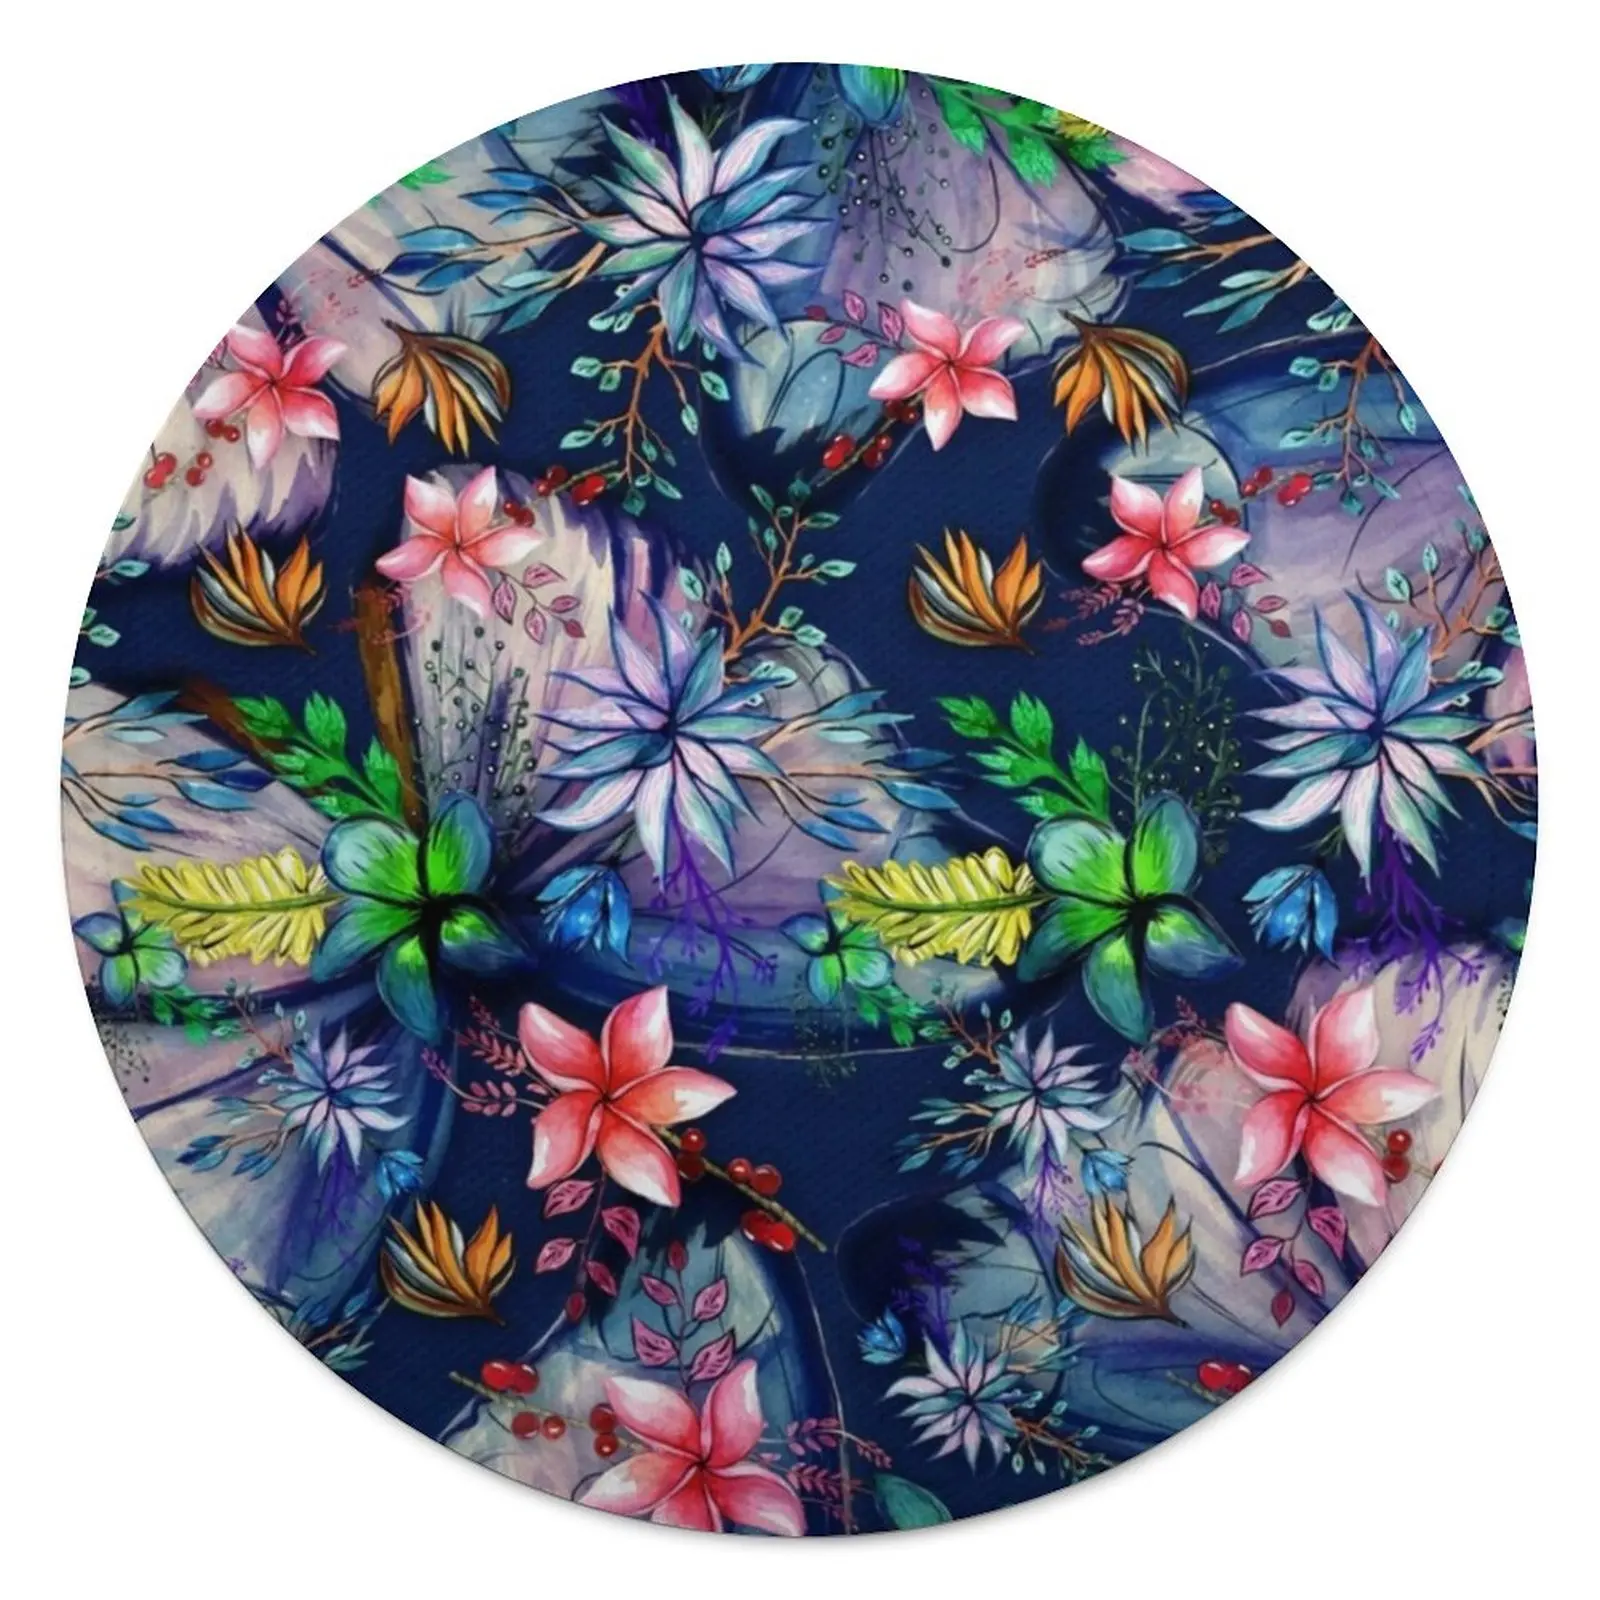 

Tropical Floral Blanket Flowers Print Fuzzy Round Fleece Couch Super Soft Cheap Bedspread